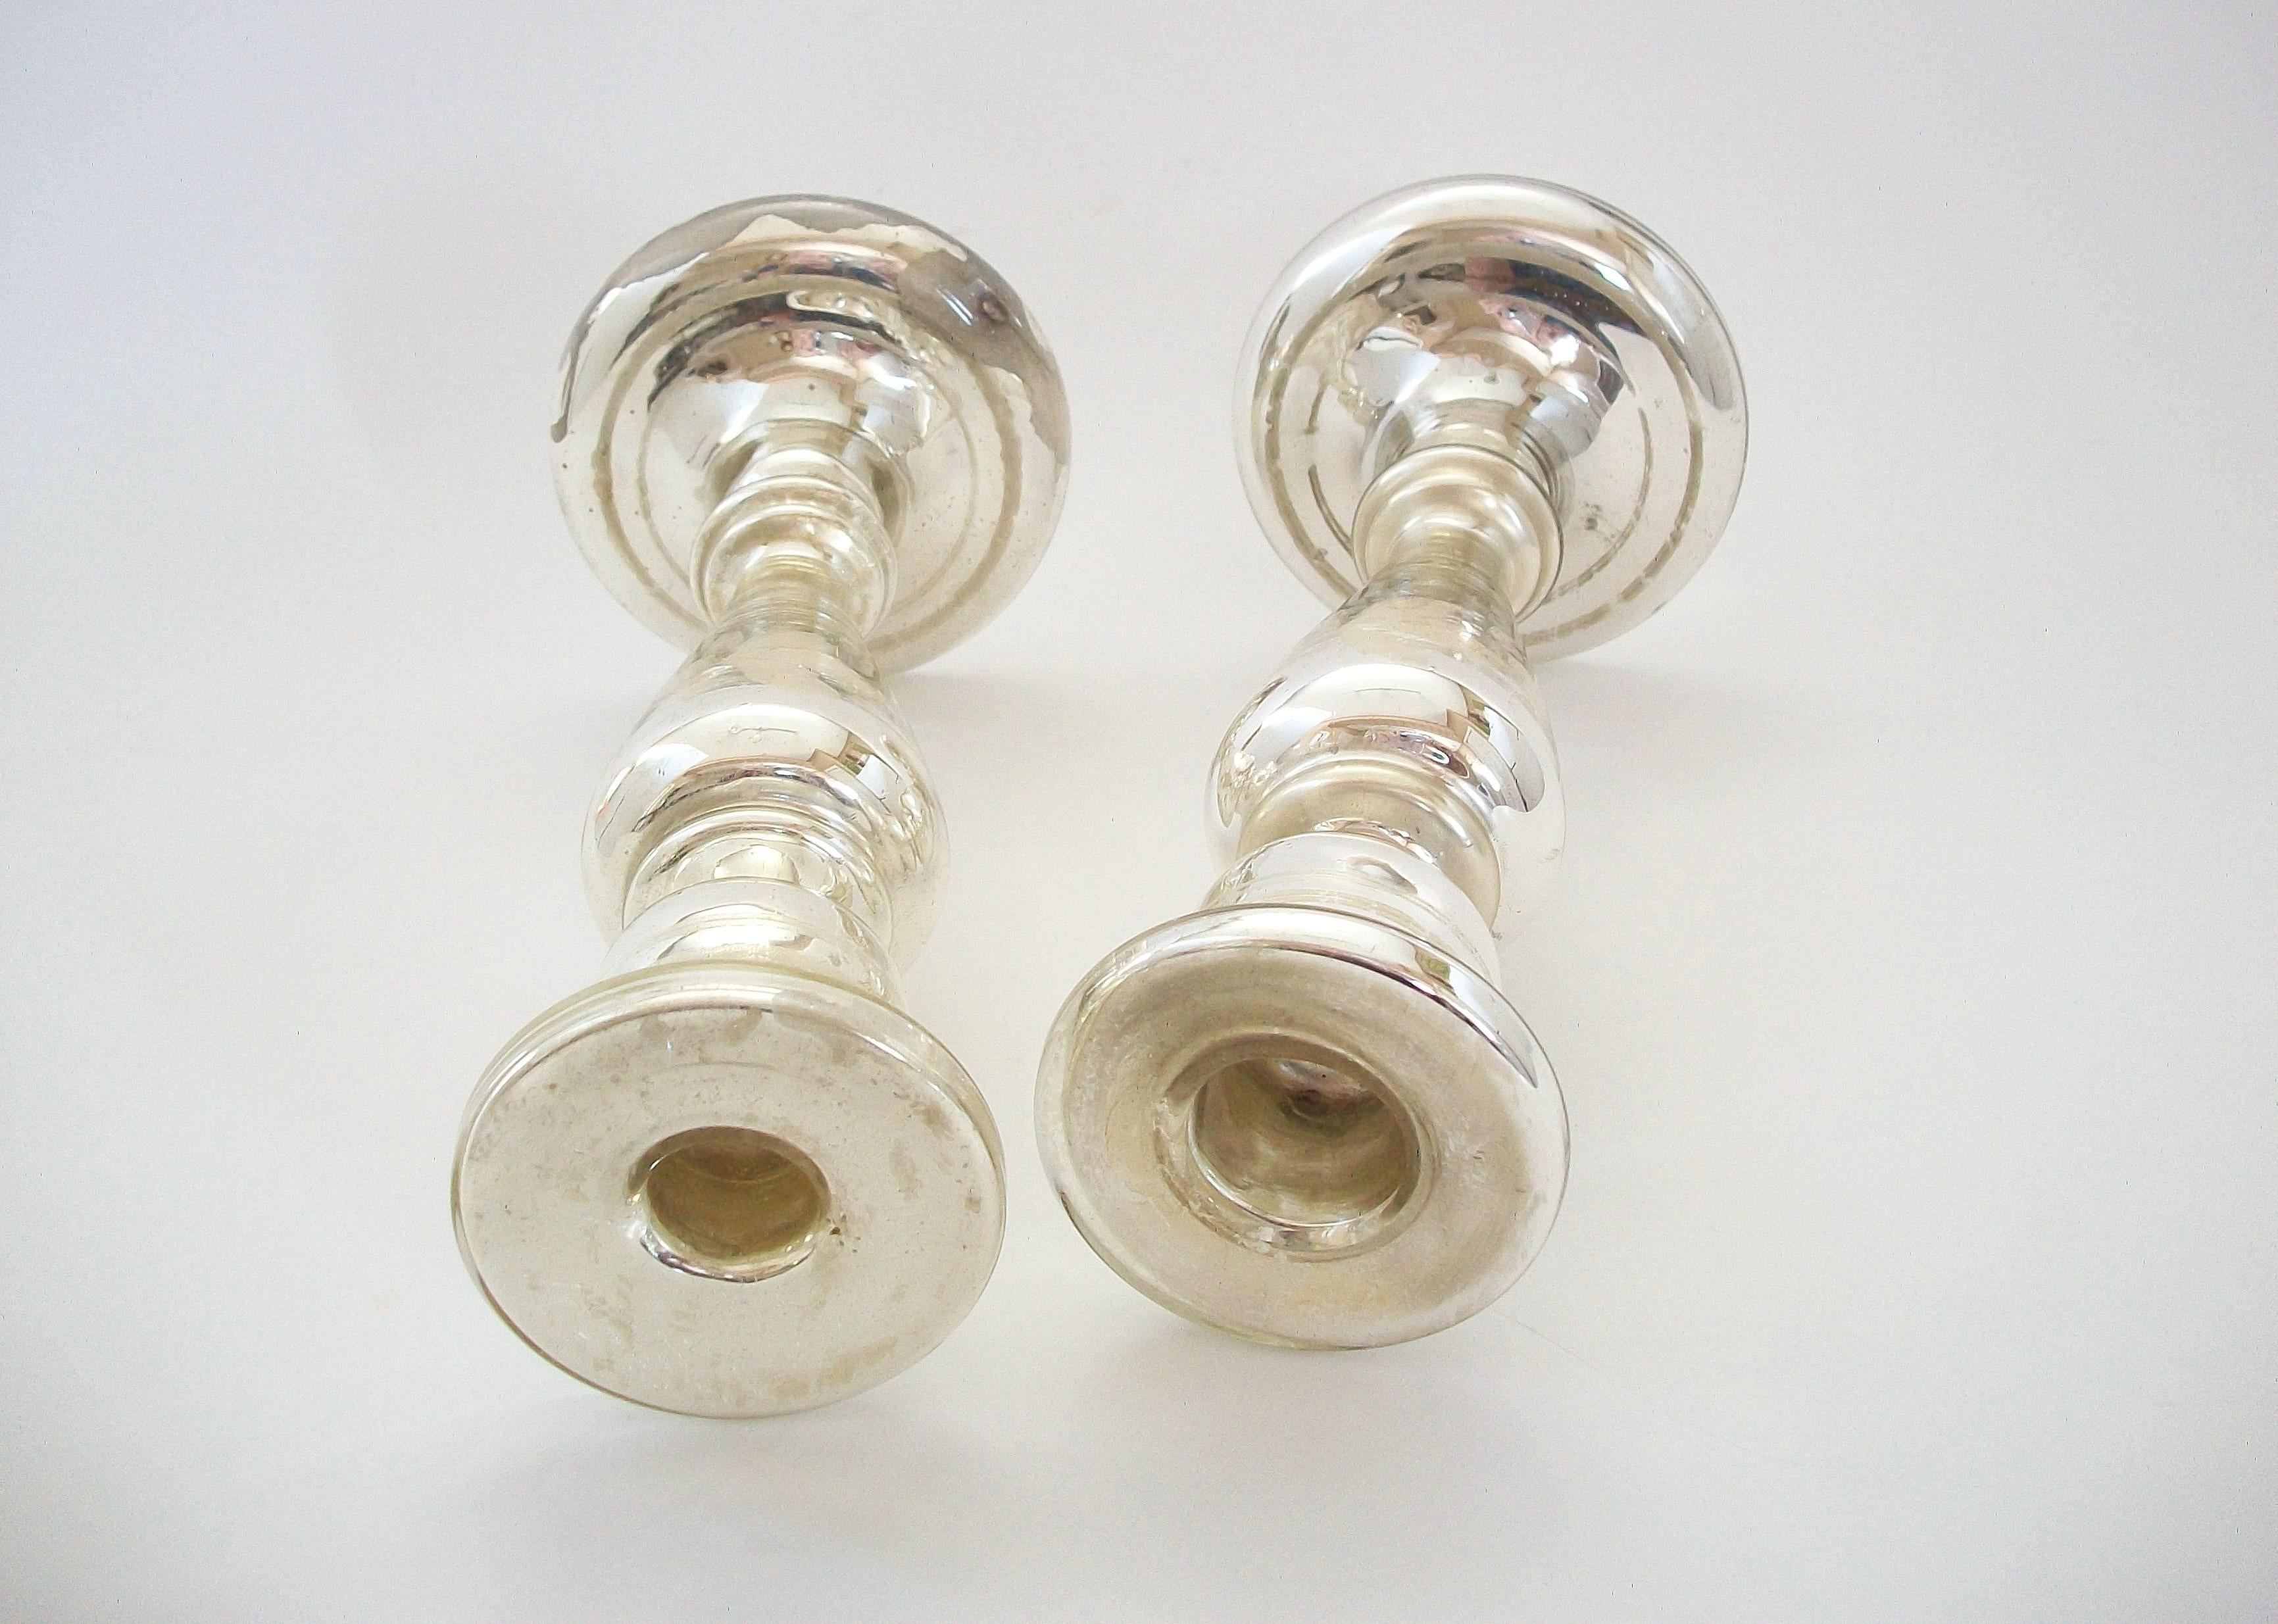 Antique Pair of White Painted Mercury Glass Candlesticks - France - Circa 1880 For Sale 1